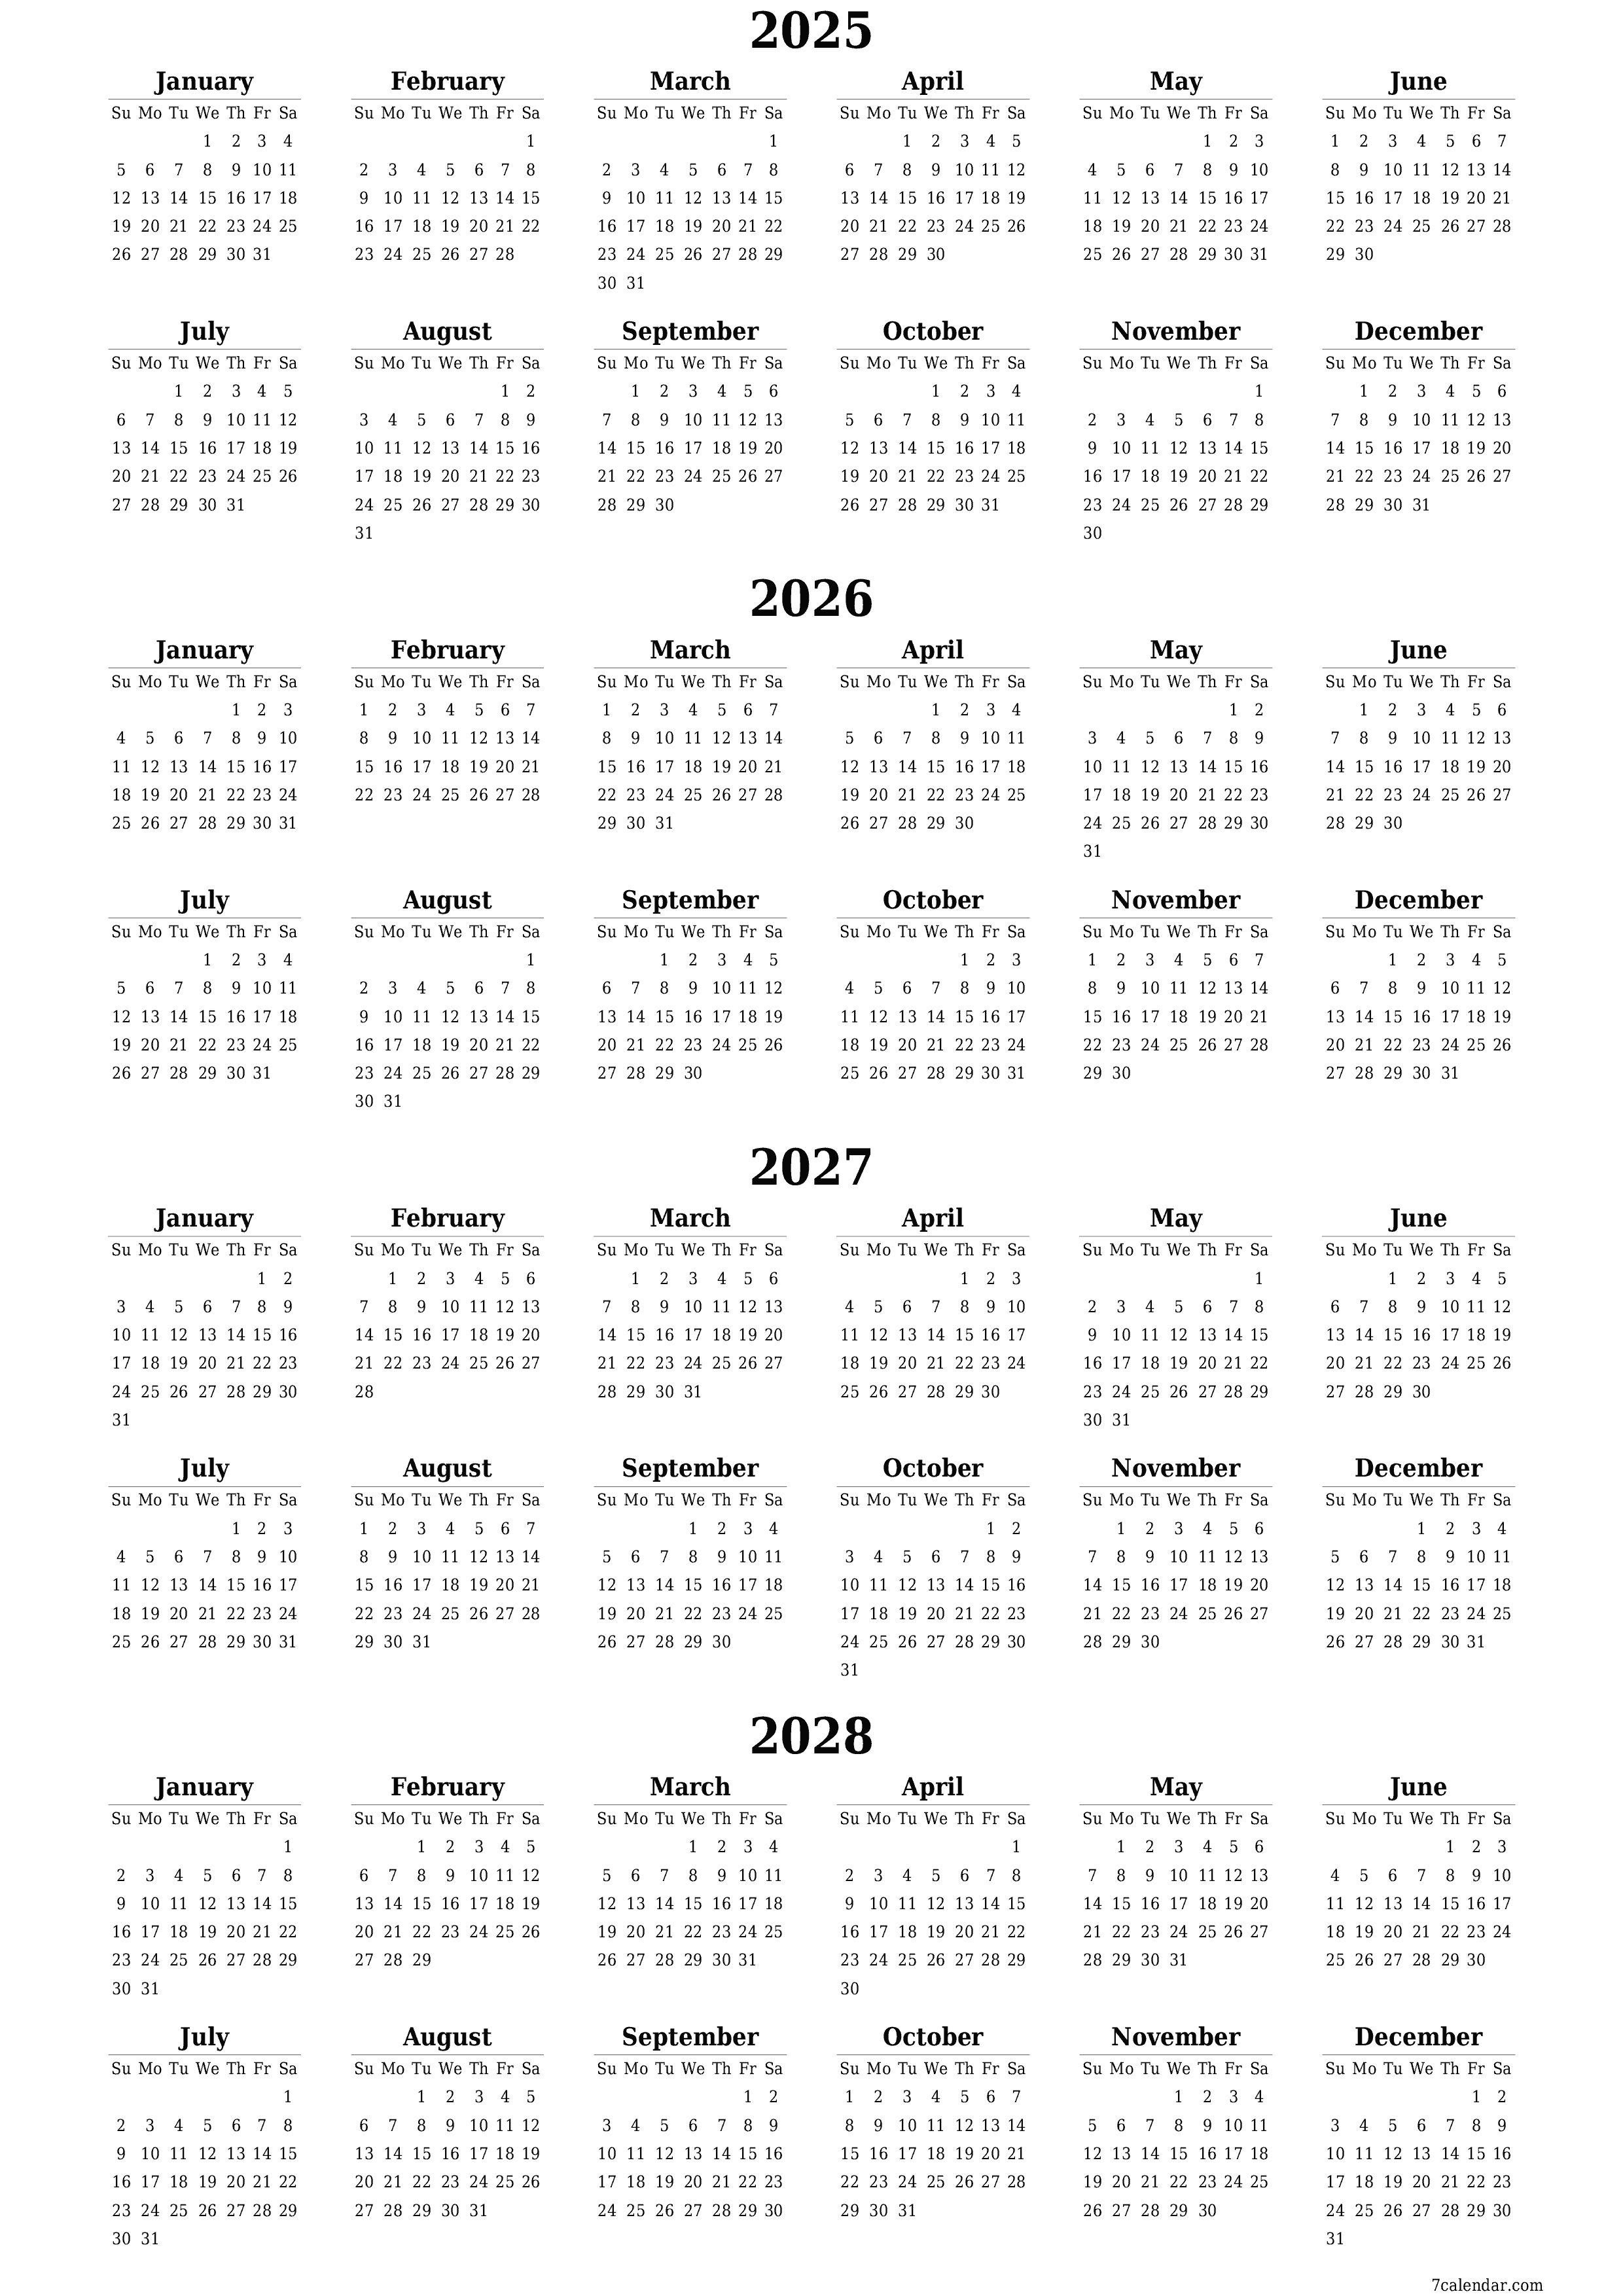 printable wall template free vertical Yearly calendar February (Feb) 2025